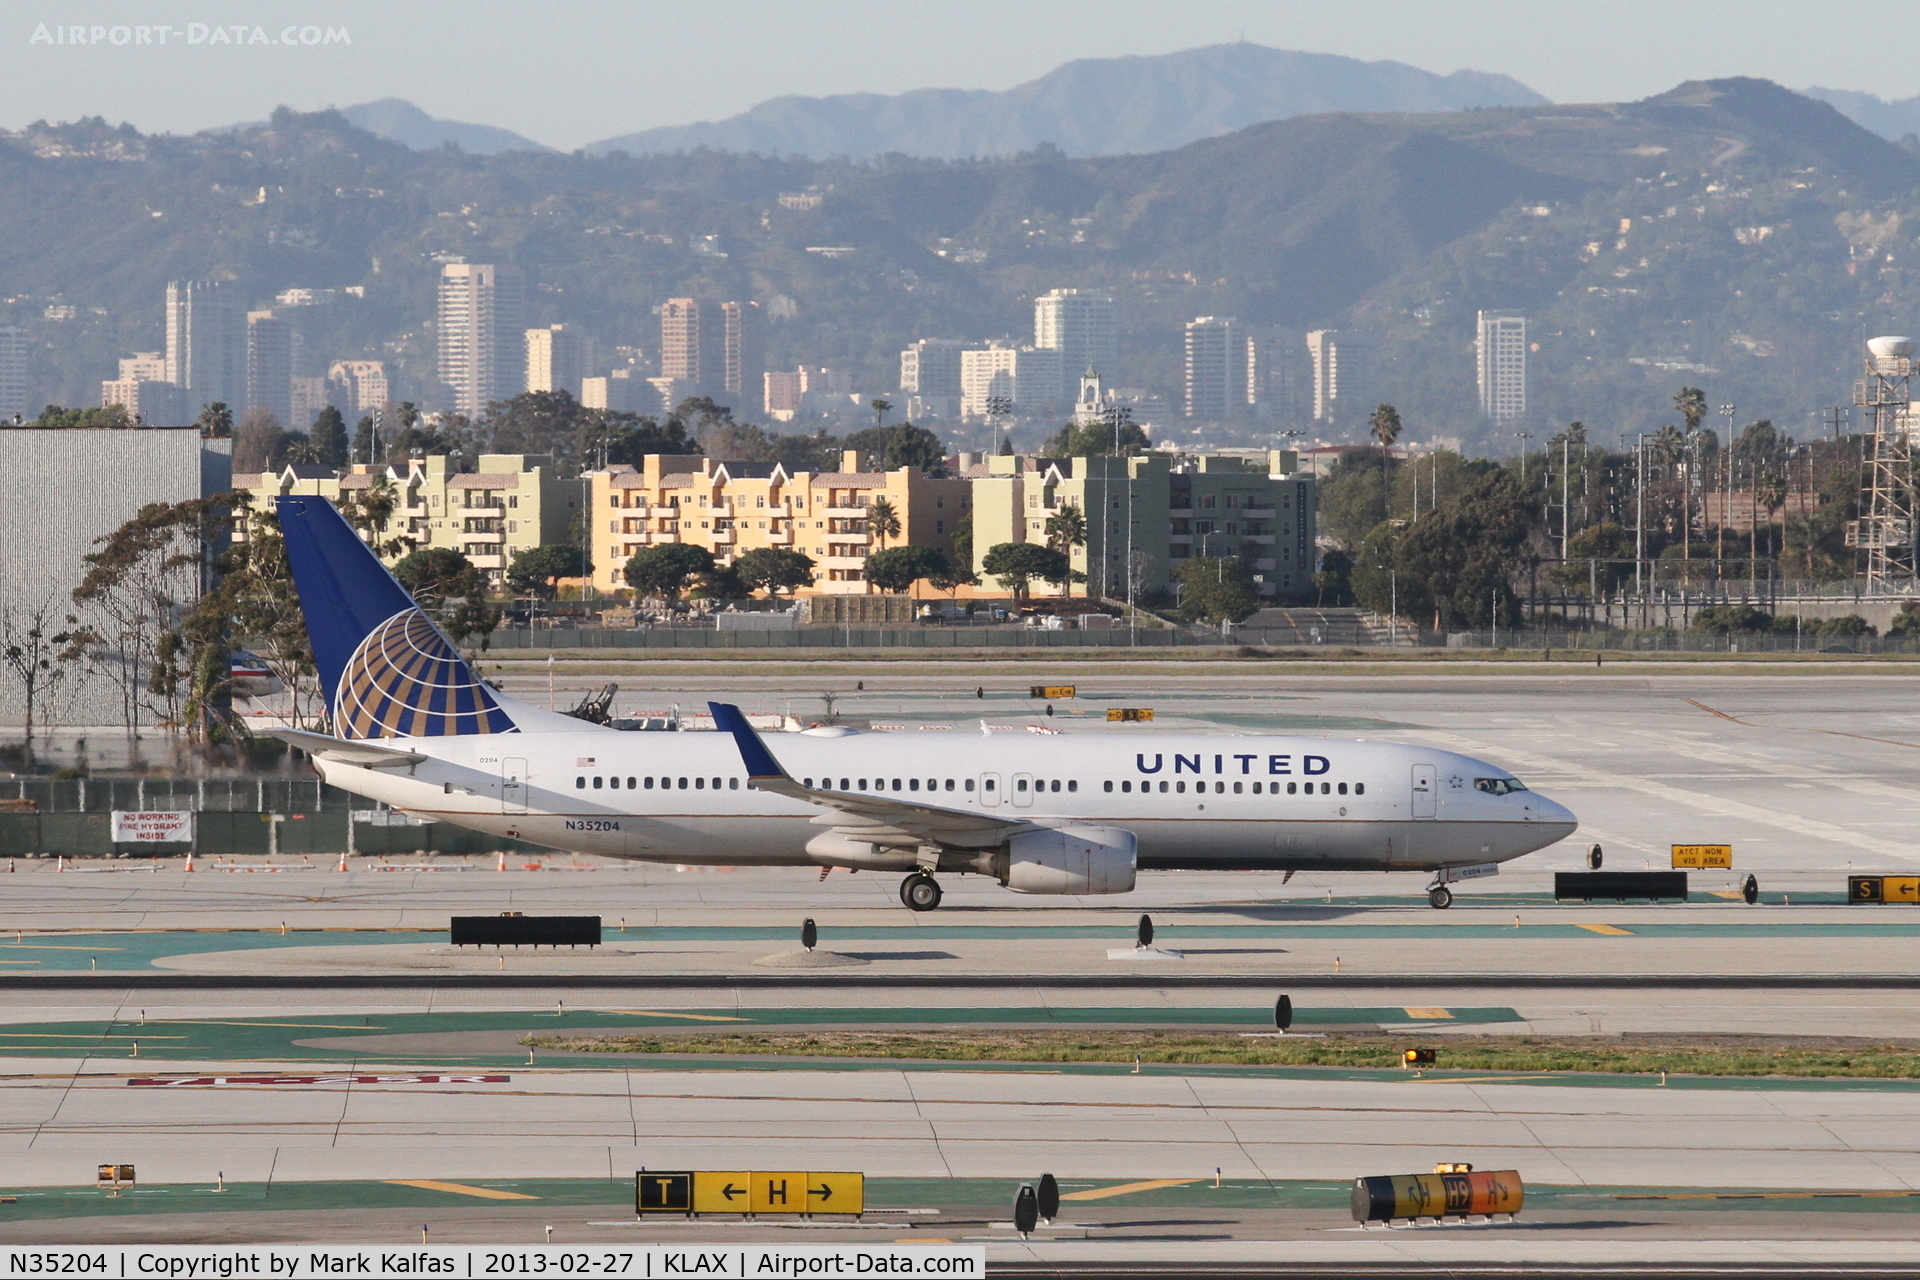 N35204, 2000 Boeing 737-824 C/N 30576, United Boeing 737-824, UAL1456 on TWY B KLAX after arriving on 24R on a trip from KDEN .